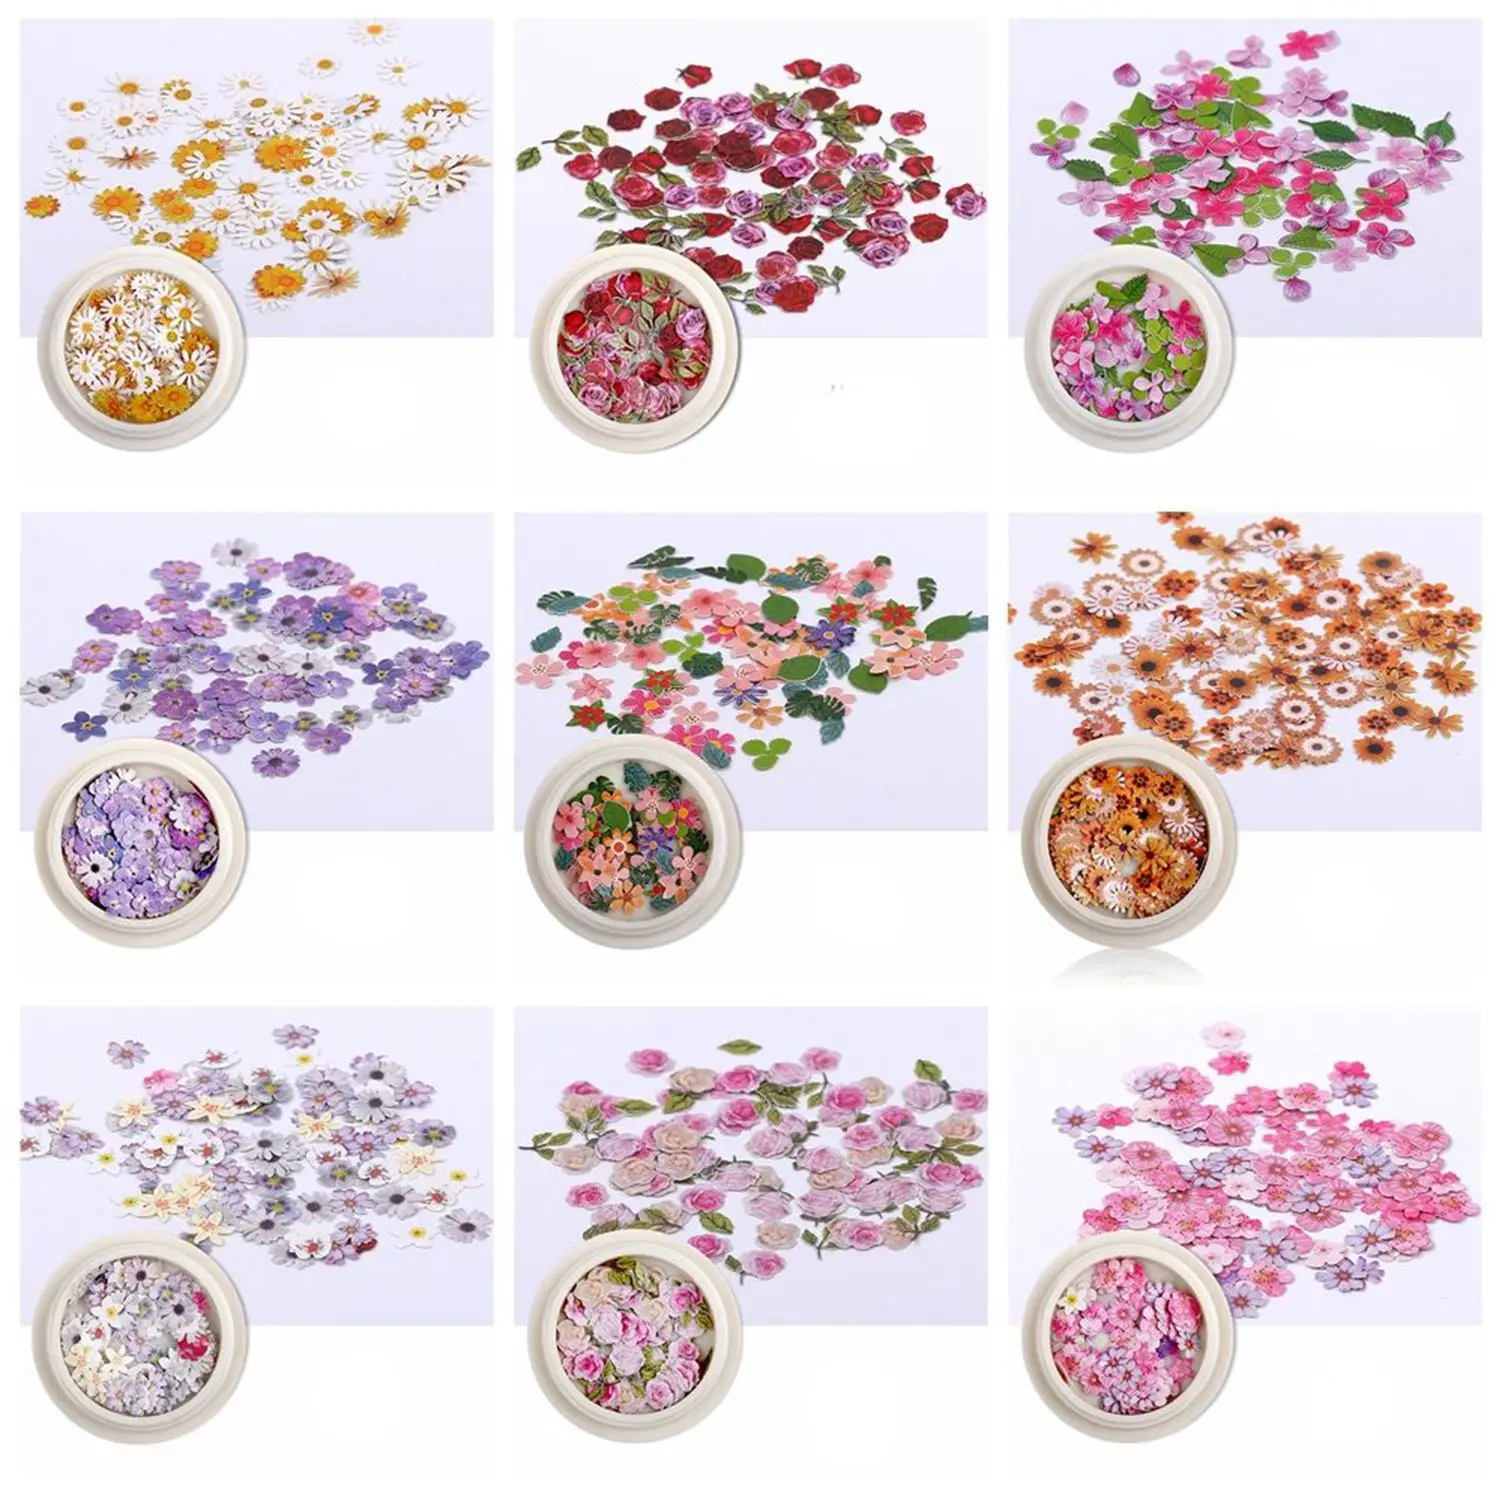 

Accessories Wood Pulp Flakes Daisy Flowers Designs Romantic Rose Nail Art Sequins Nail Paillettes Ultrathin Holographic